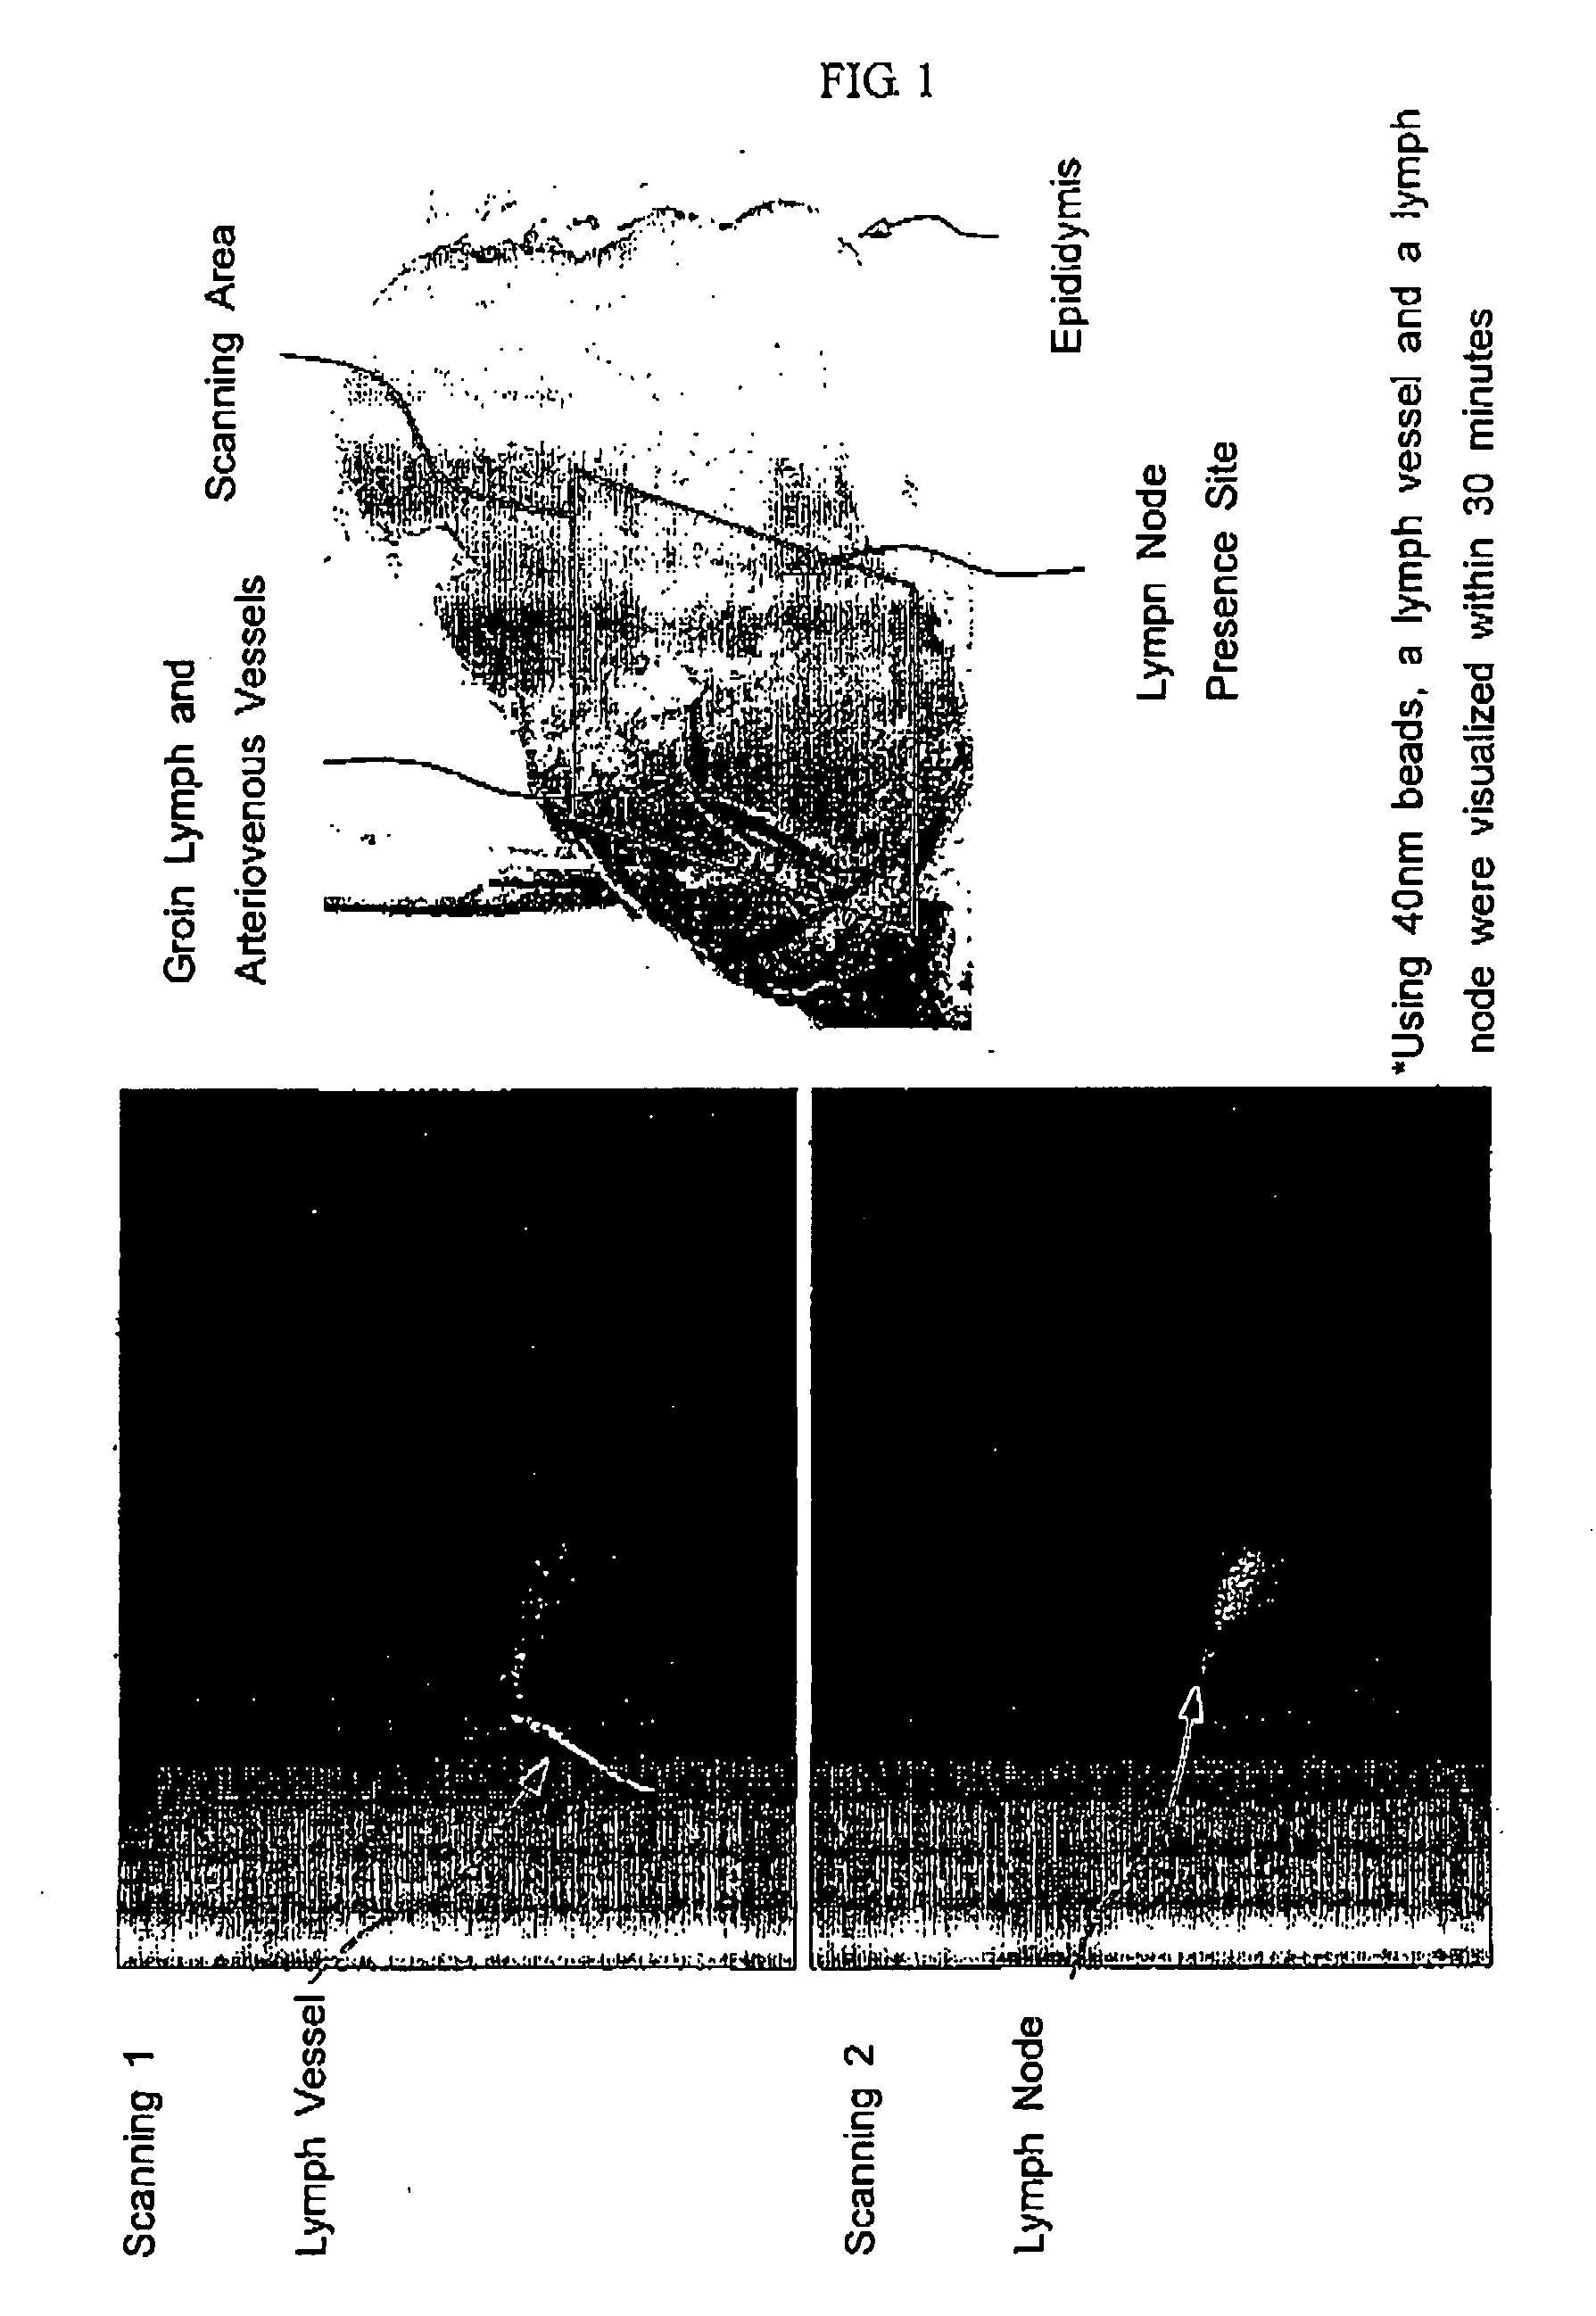 Agent for detecting sentinel lymph node and detection method